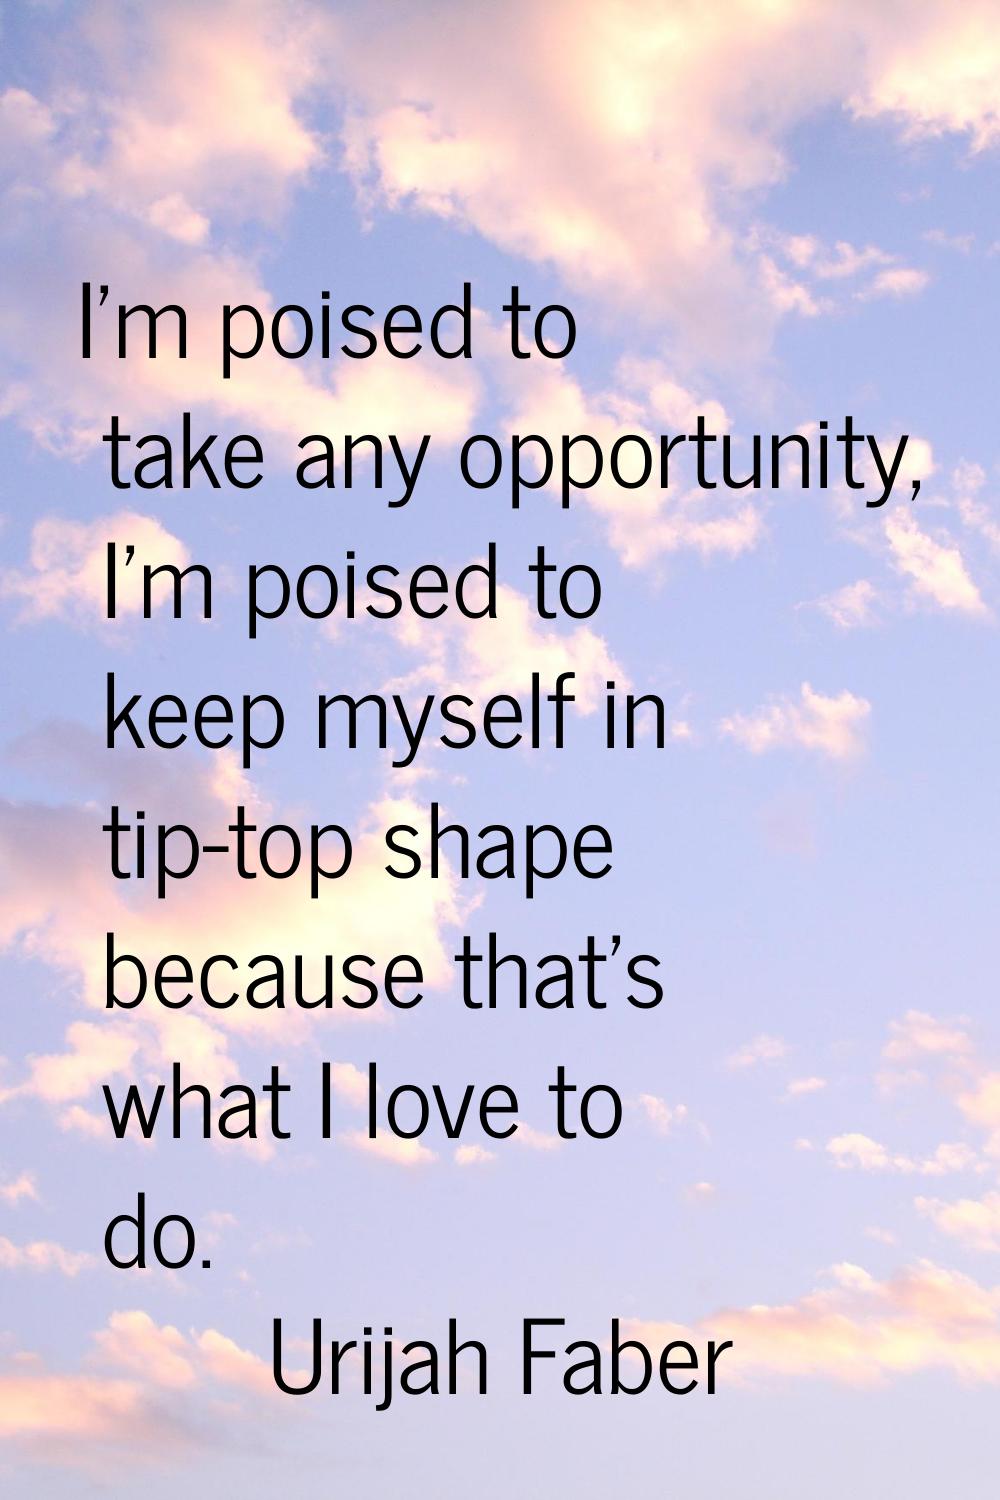 I'm poised to take any opportunity, I'm poised to keep myself in tip-top shape because that's what 